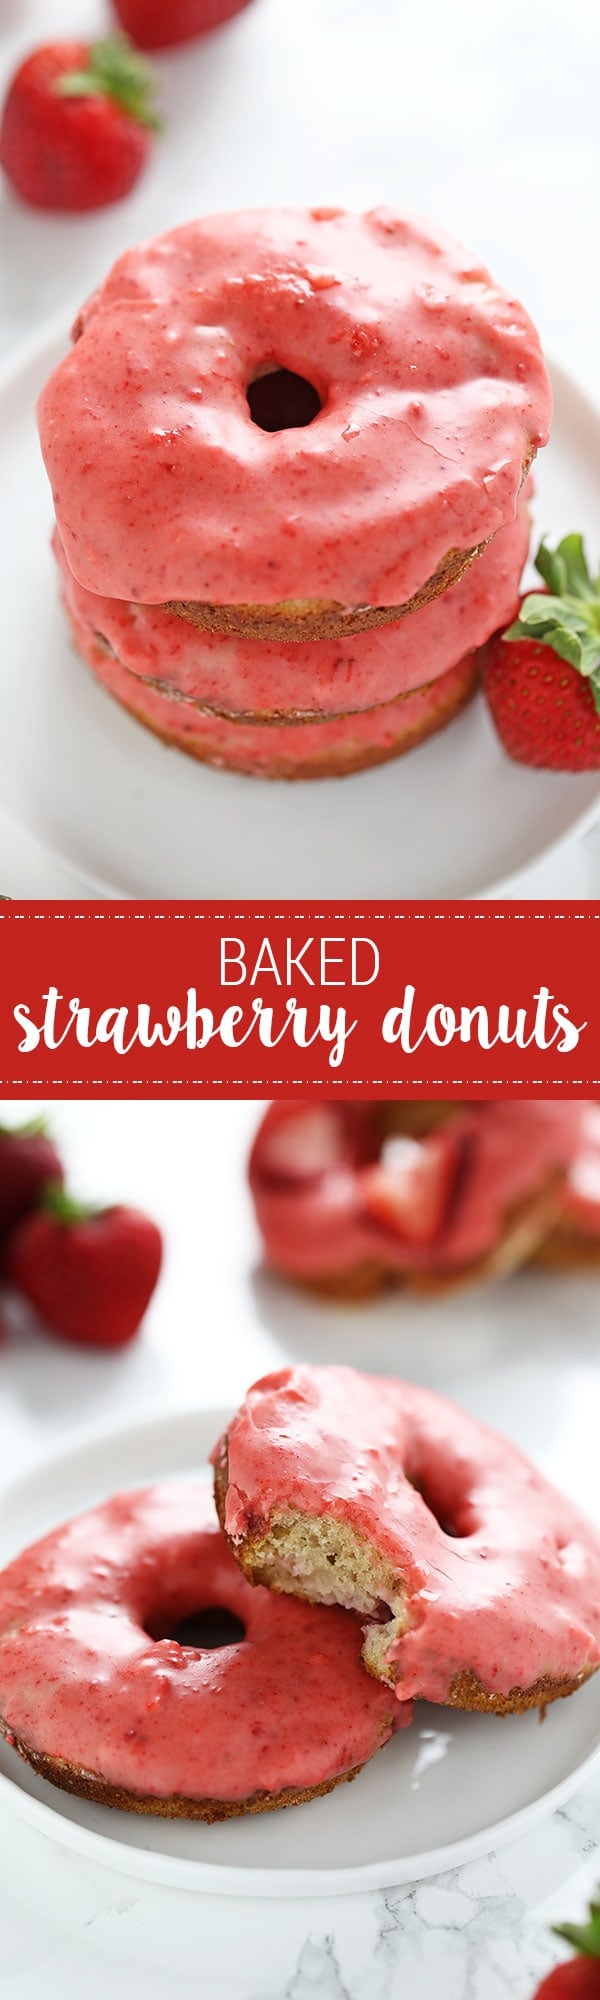 Lightened up with Greek yogurt, these fresh Strawberry Baked Donuts feature an ultra thick pink strawberry glaze and come together in just 35 minutes! No artificial flavors.